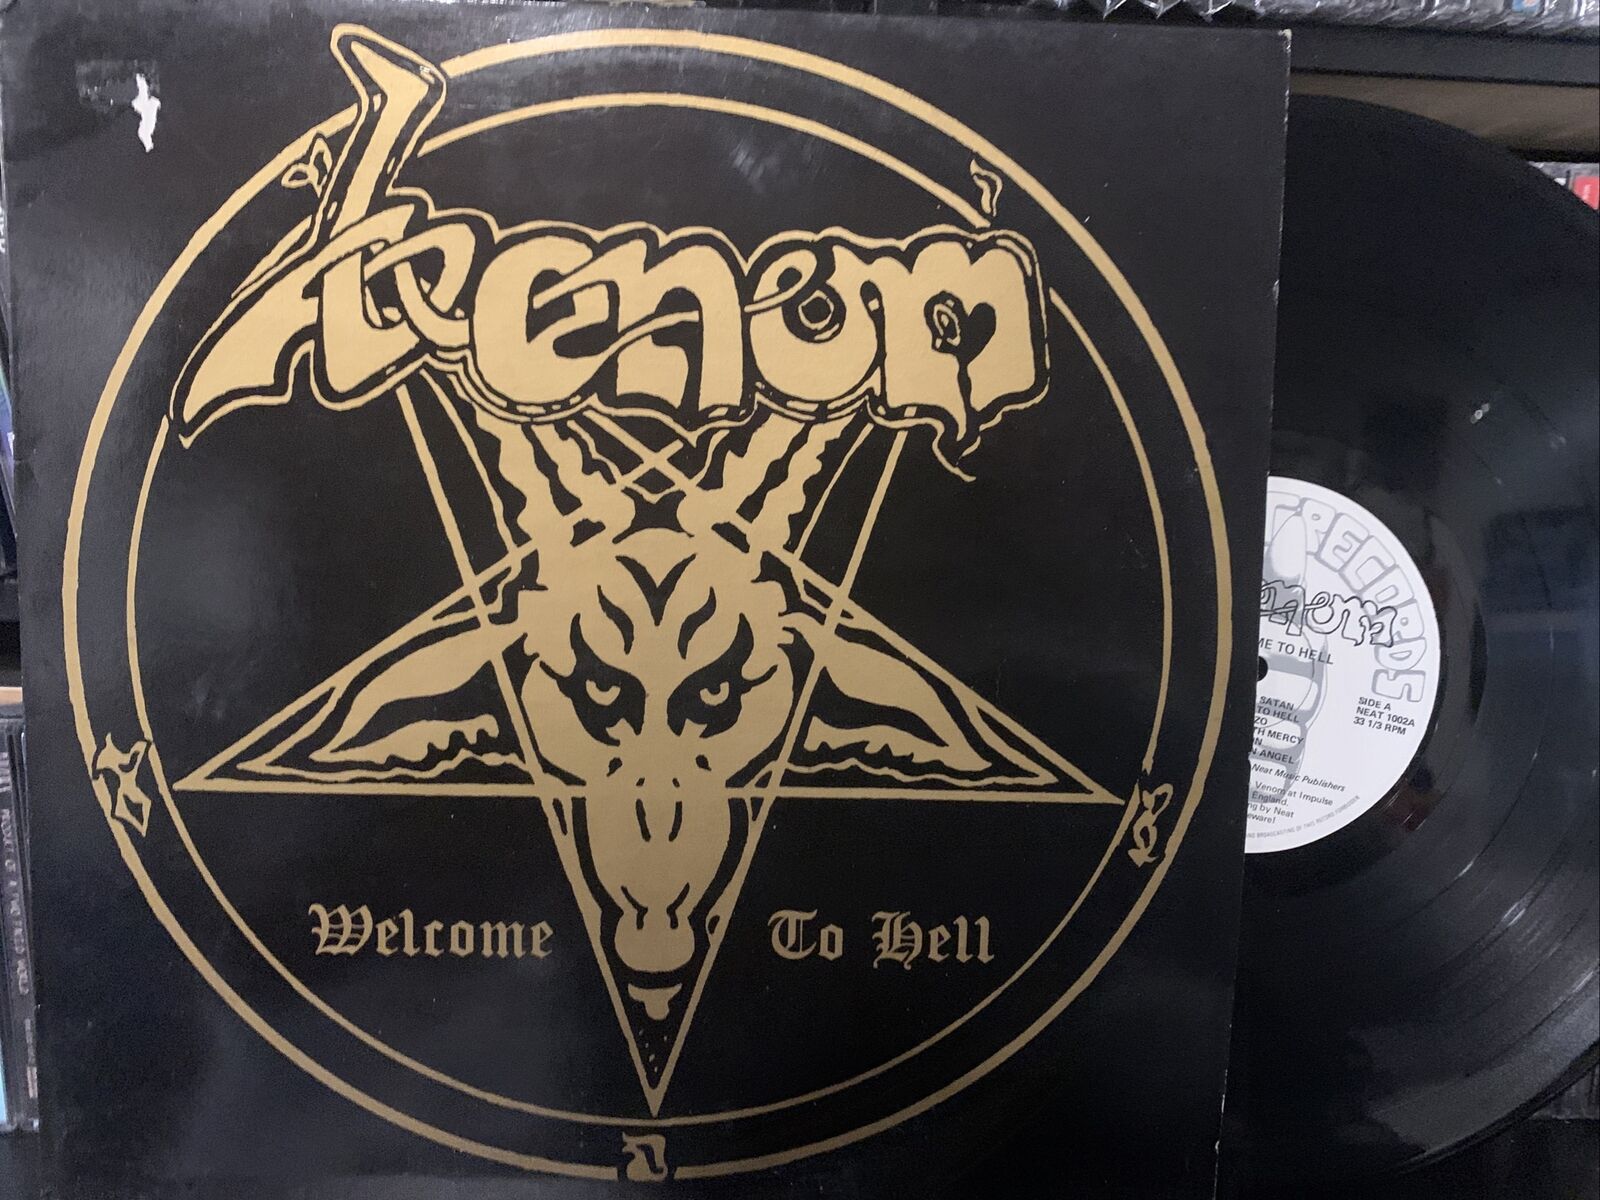 Venom – Welcome To Hell LP 1981 Neat Records – NEAT 1002 LP VG/VG+